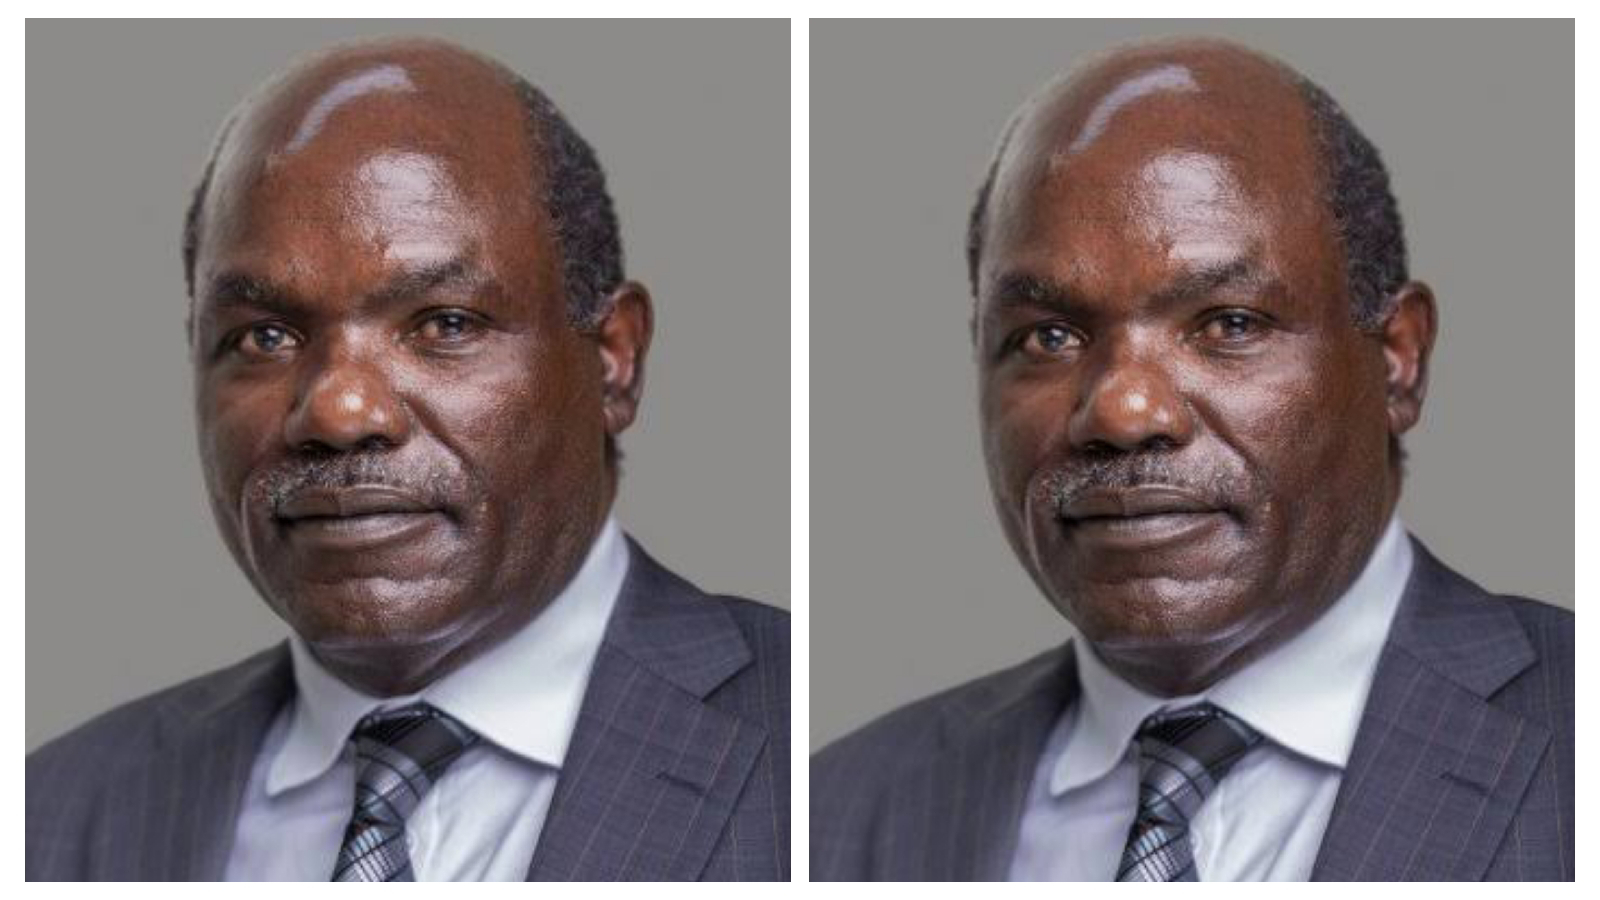 HOT Funeral Lee Home comments on Twitter as Wafula Chebukati